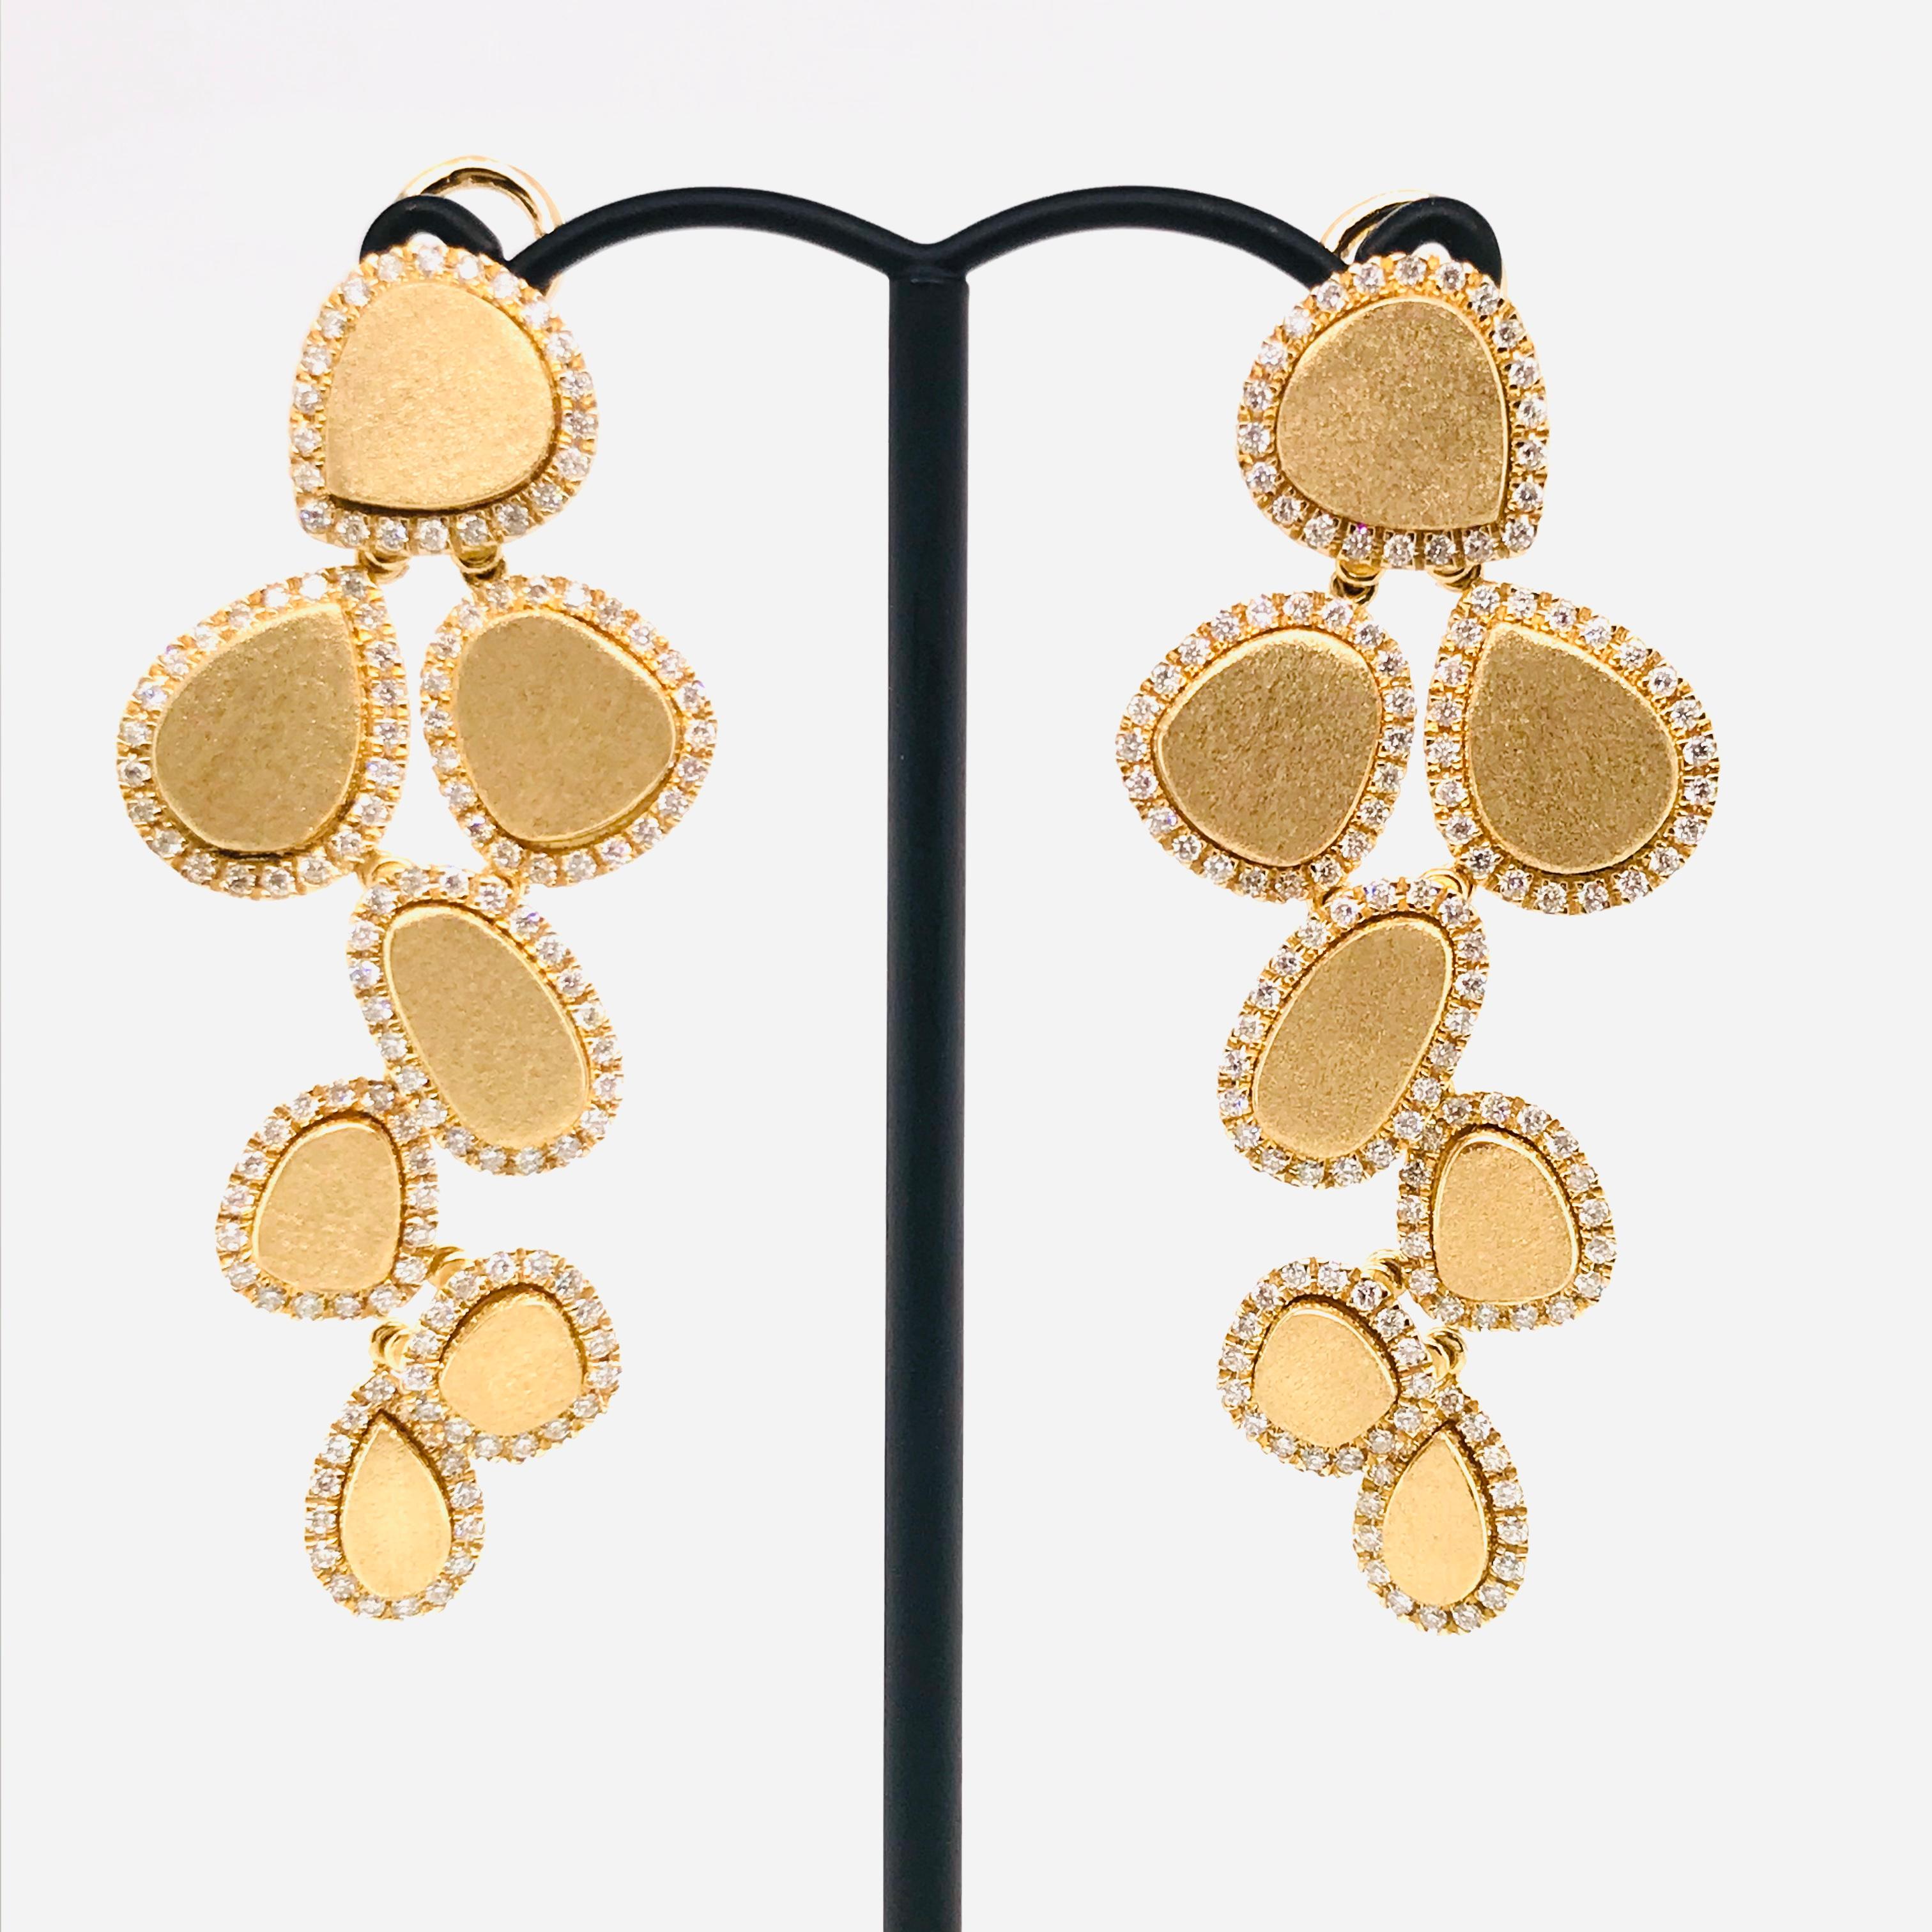 Brilliant Cut Diamonds and Brushed Yellow Gold 18 Karat Articulated Chandelier Earrings